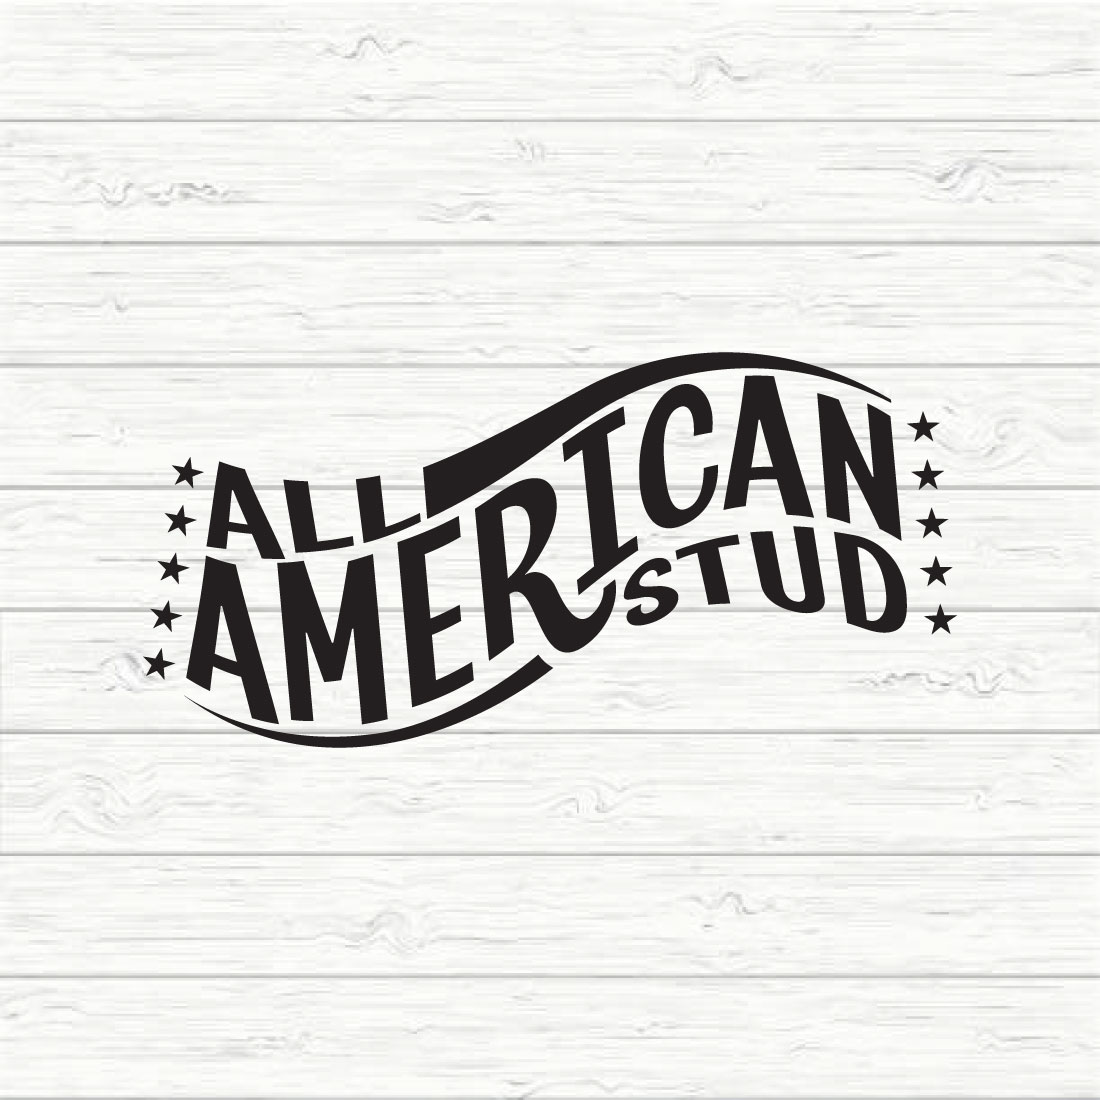 All American Stud preview image.